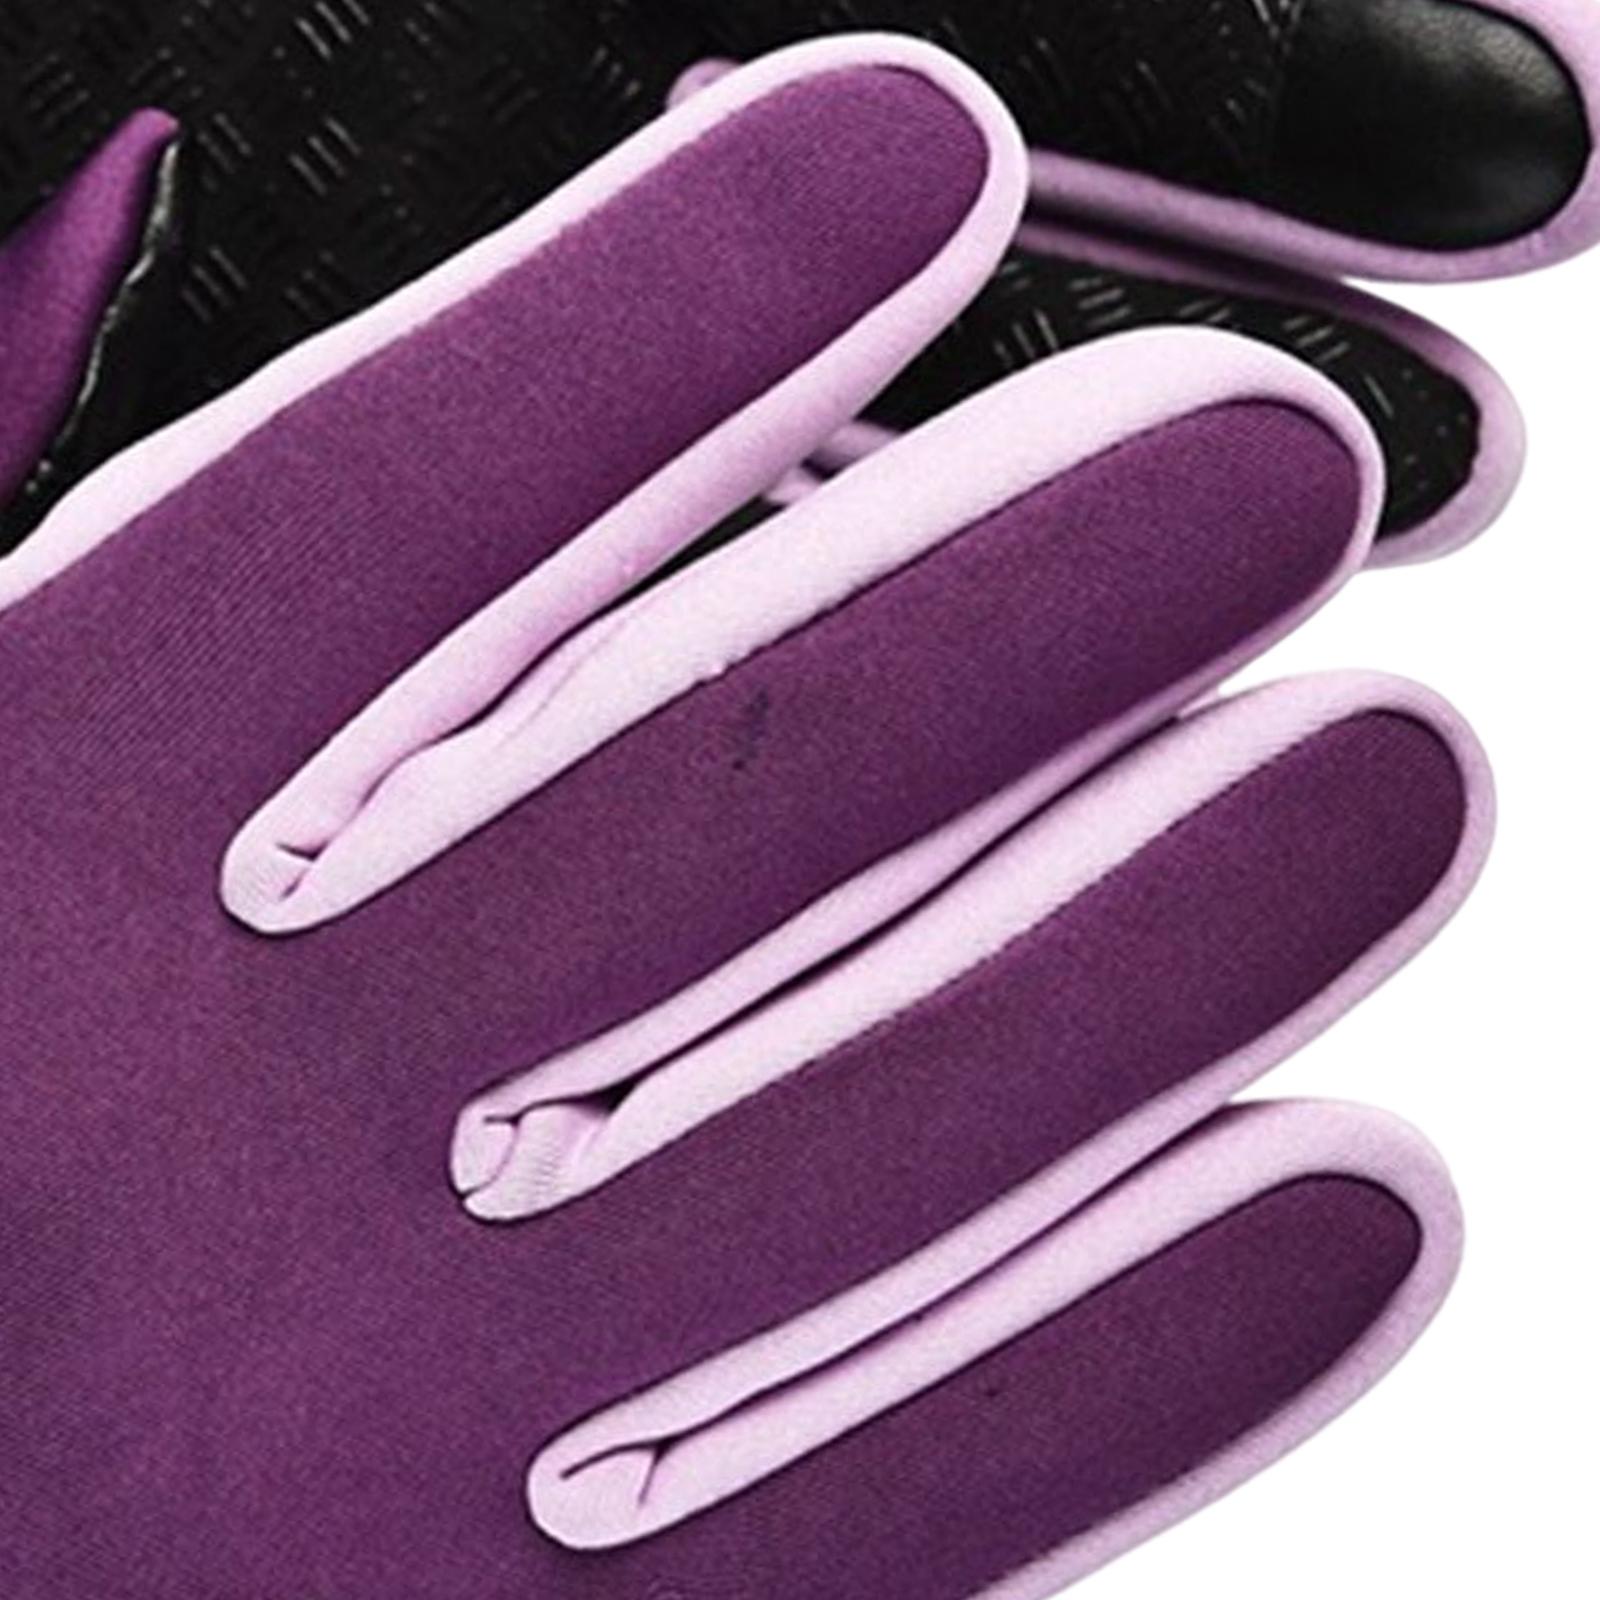 Winter Gloves Nonslip Thermal Gloves for Outdoor Running Sports Motorcycle L Purple